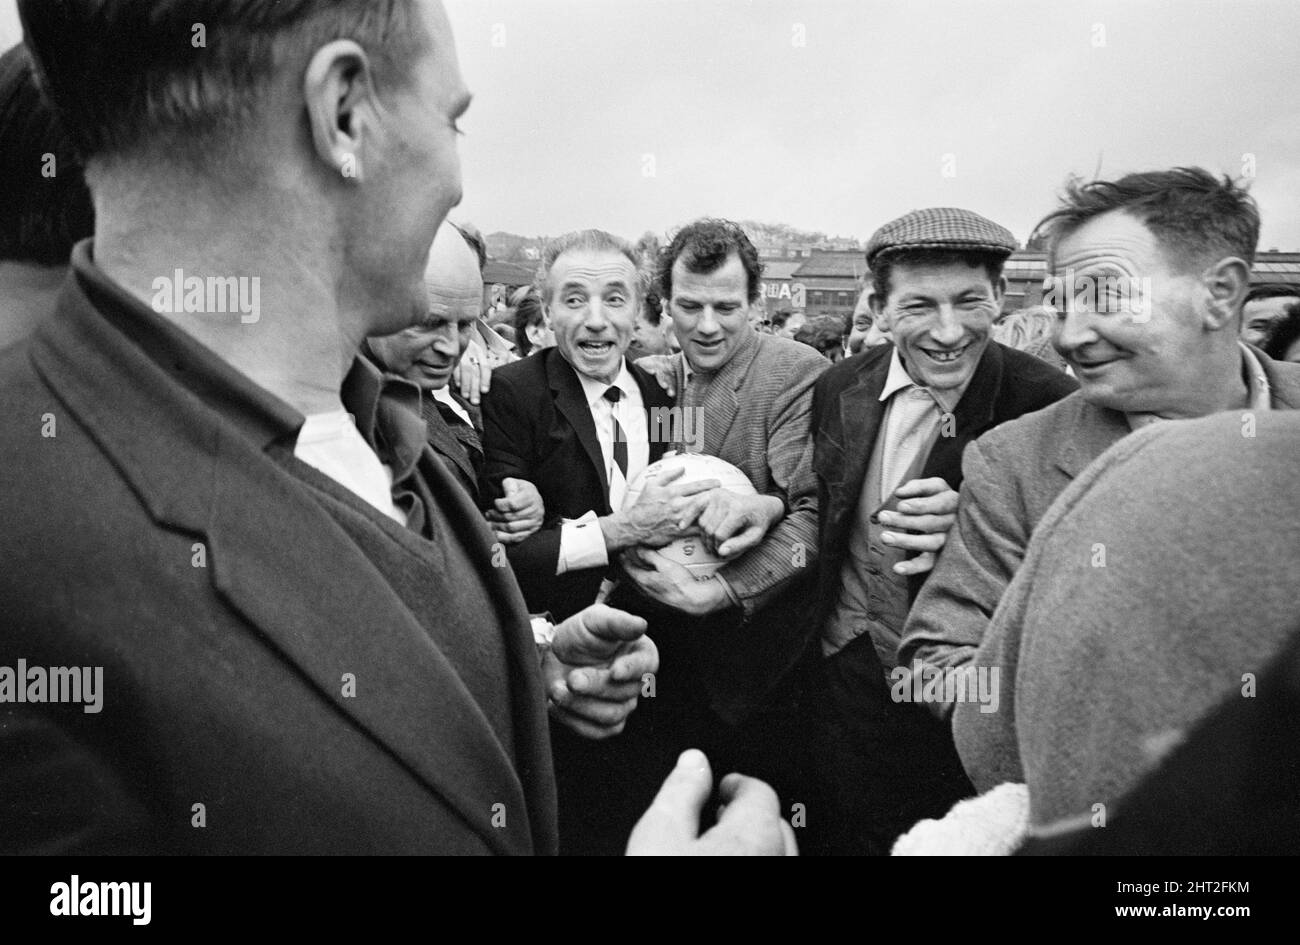 The traditional Royal Shrovetide Football Match, a 'medieval football' game played annually on Shrove Tuesday and Ash Wednesday in the town of Ashbourne in Derbyshire. Guest of honour Sir Stanley Matthews is hustled through the crowd by some hefty villagers toward the start point of the game. 22nd February 1966. Stock Photo